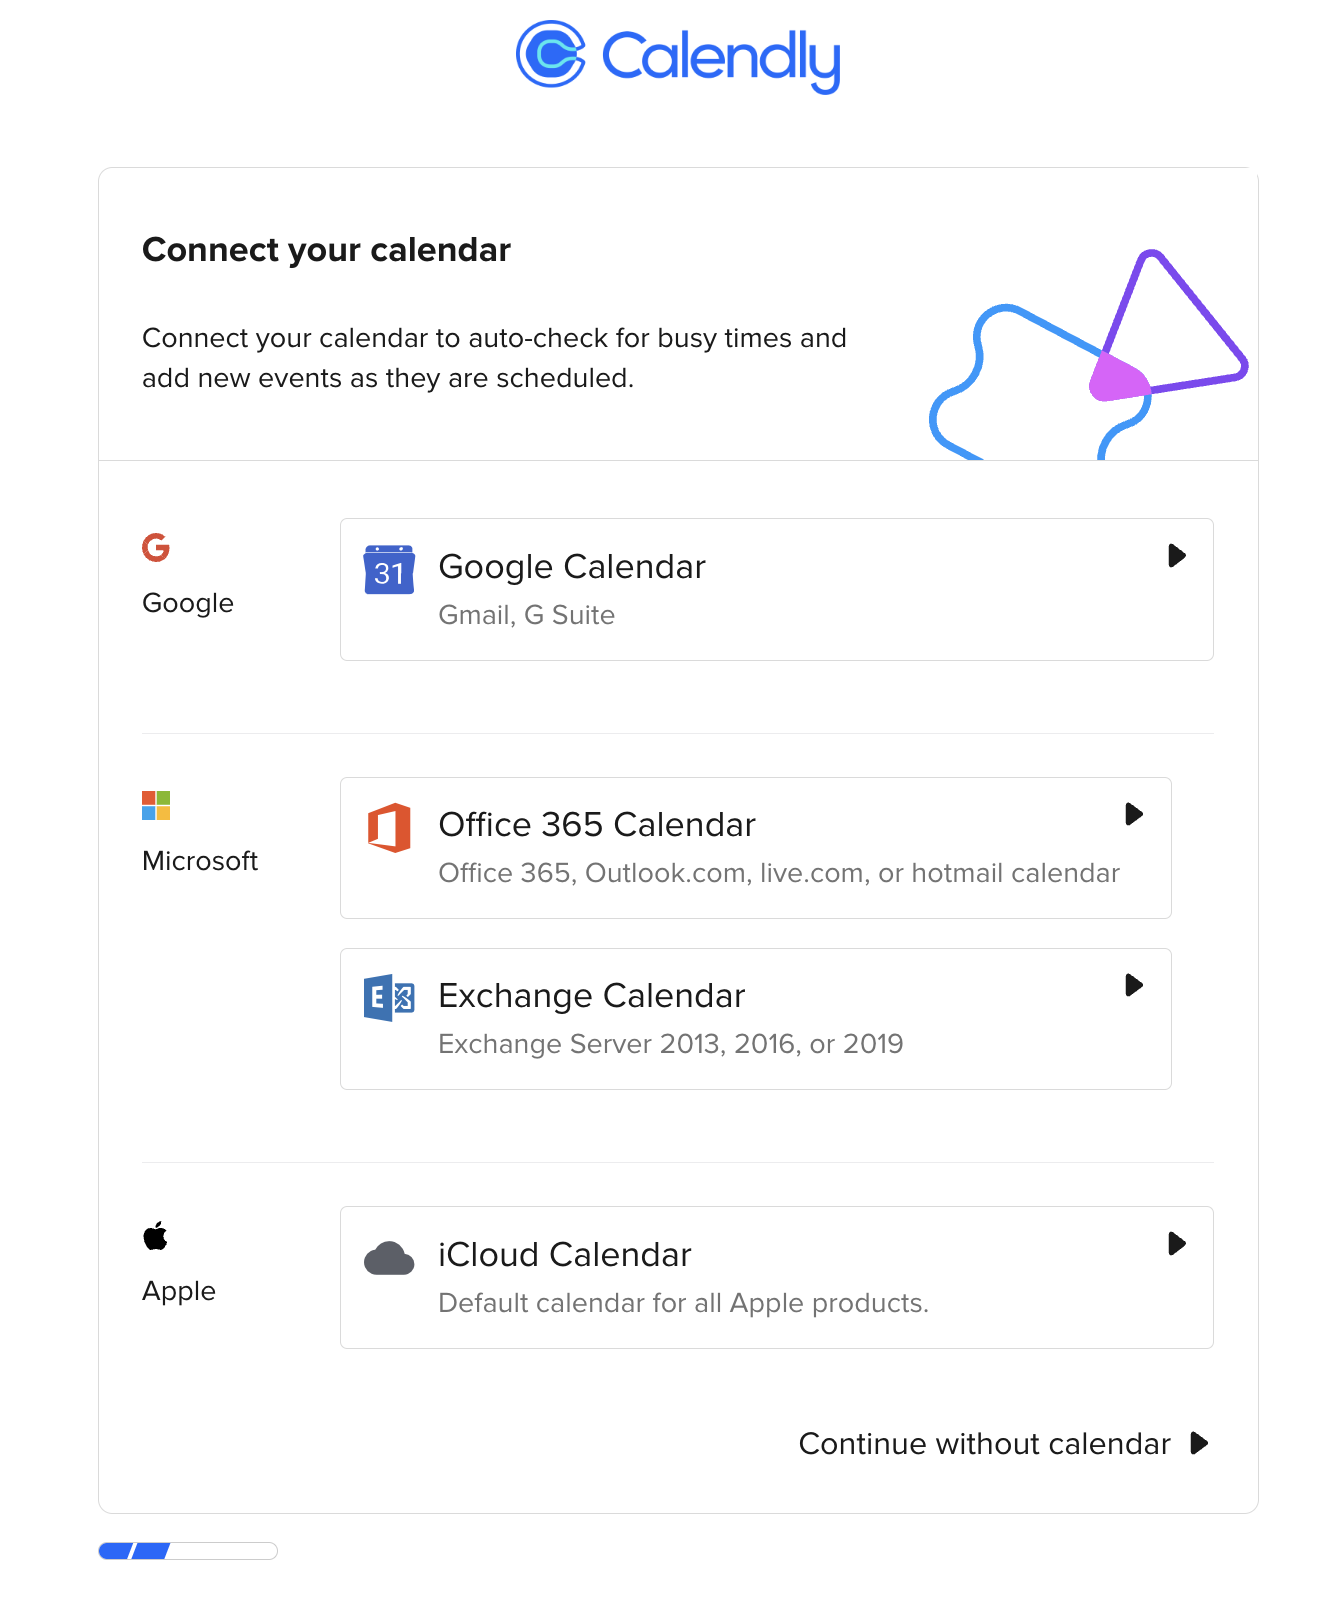 How to connect Calendly to your calendar apps.